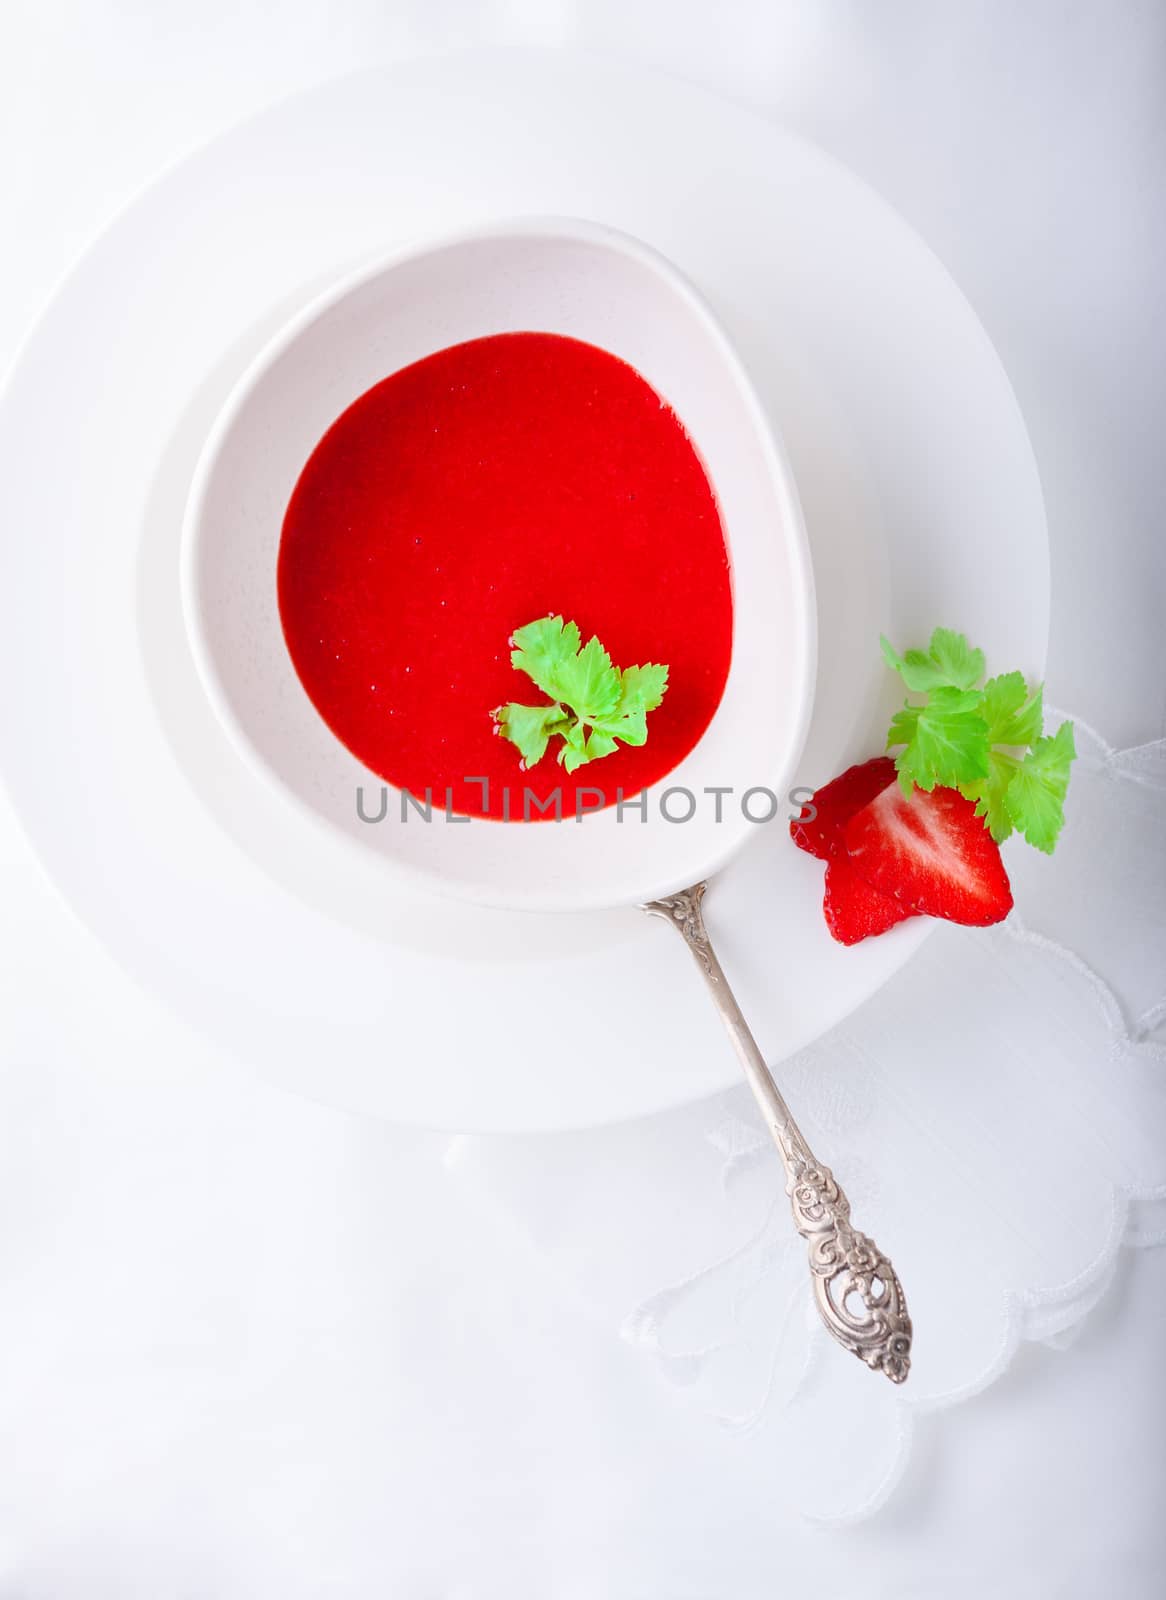 Strawberry soup with white napkin on a table. by supercat67